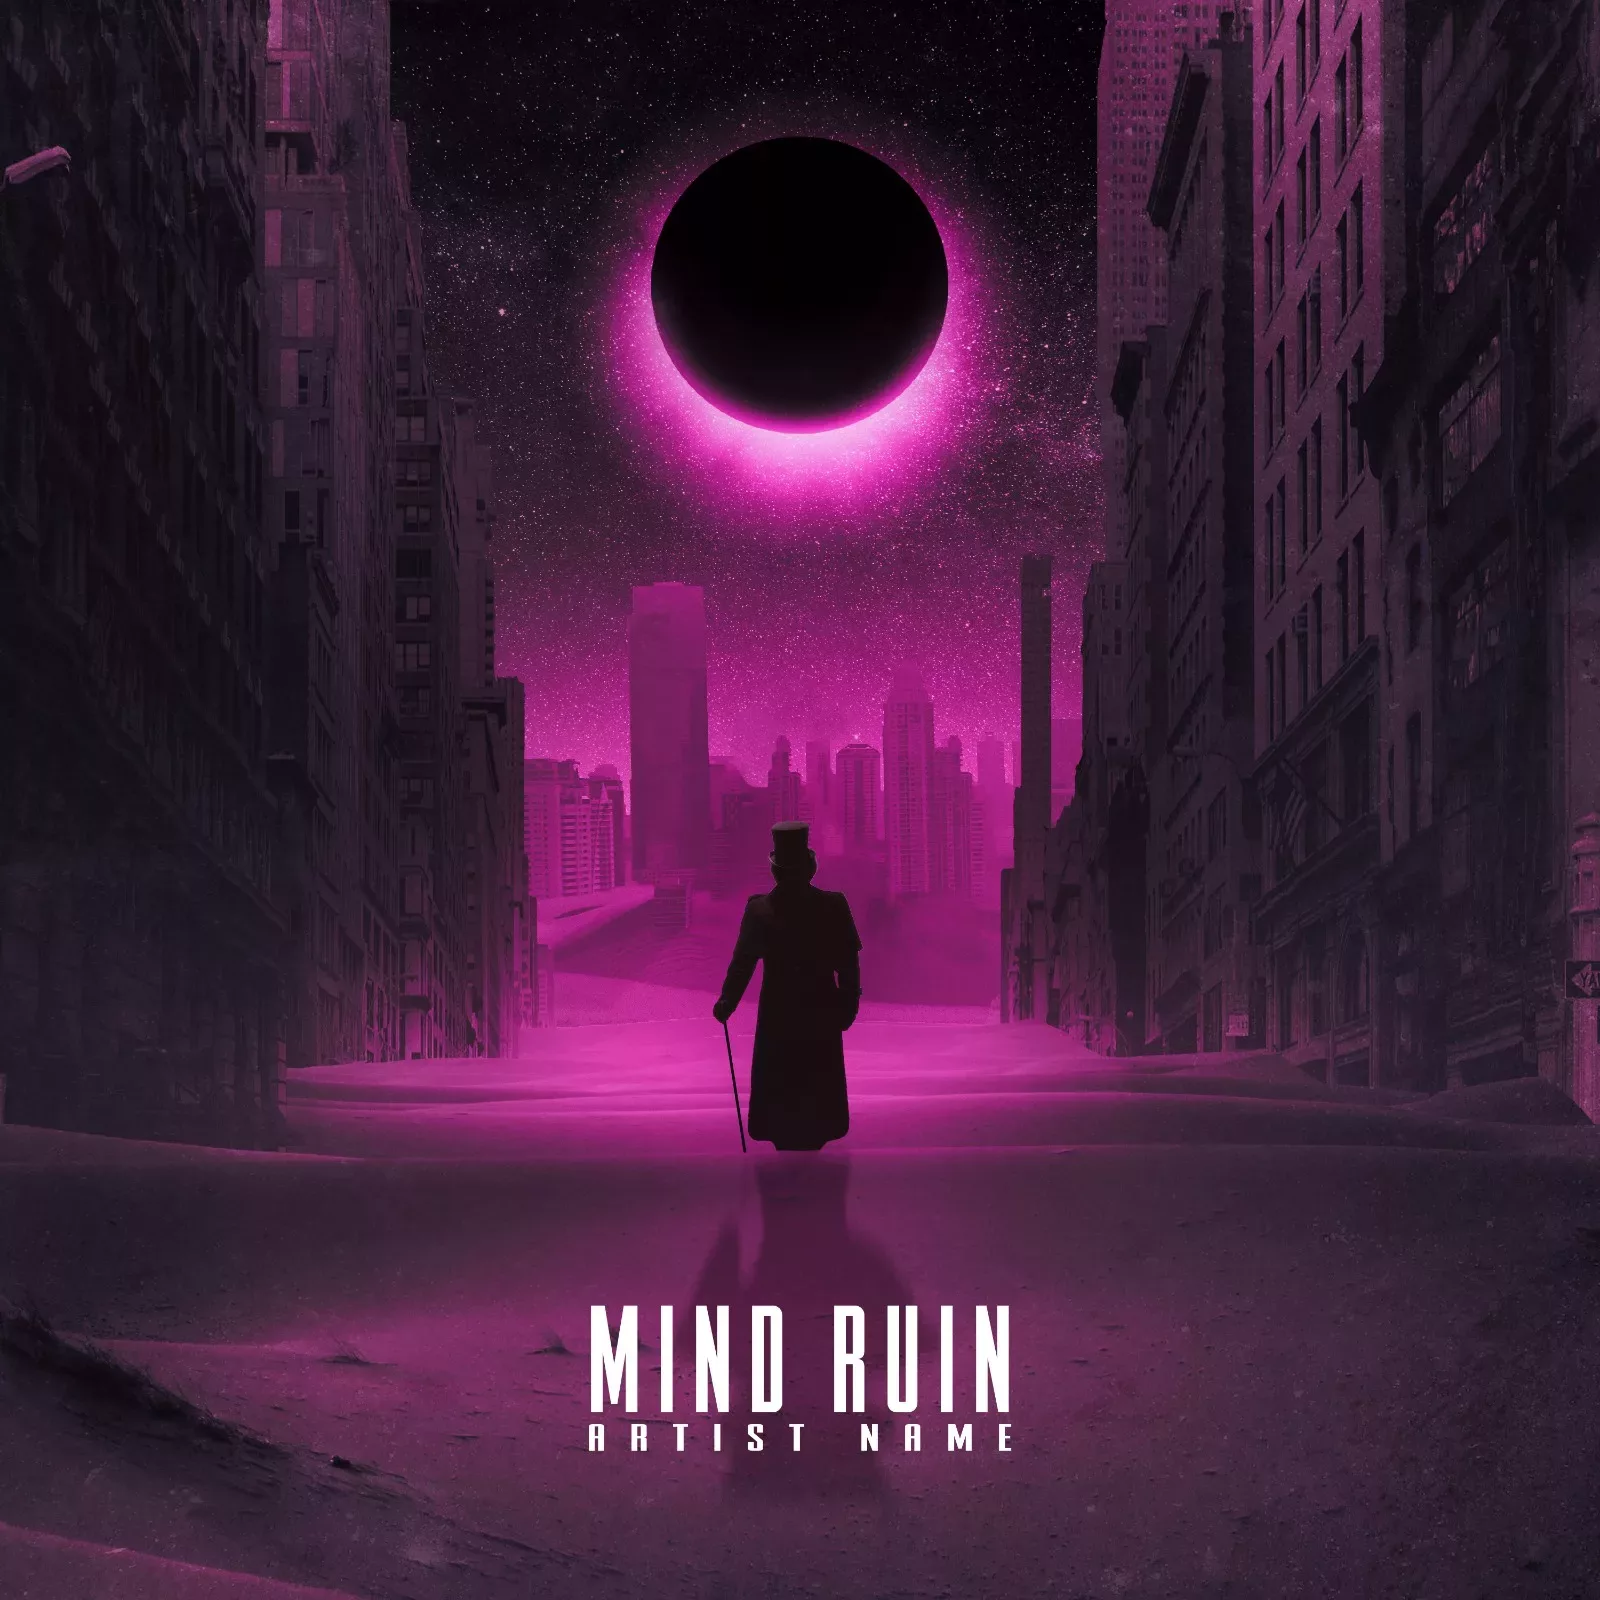 Mind ruin cover art for sale